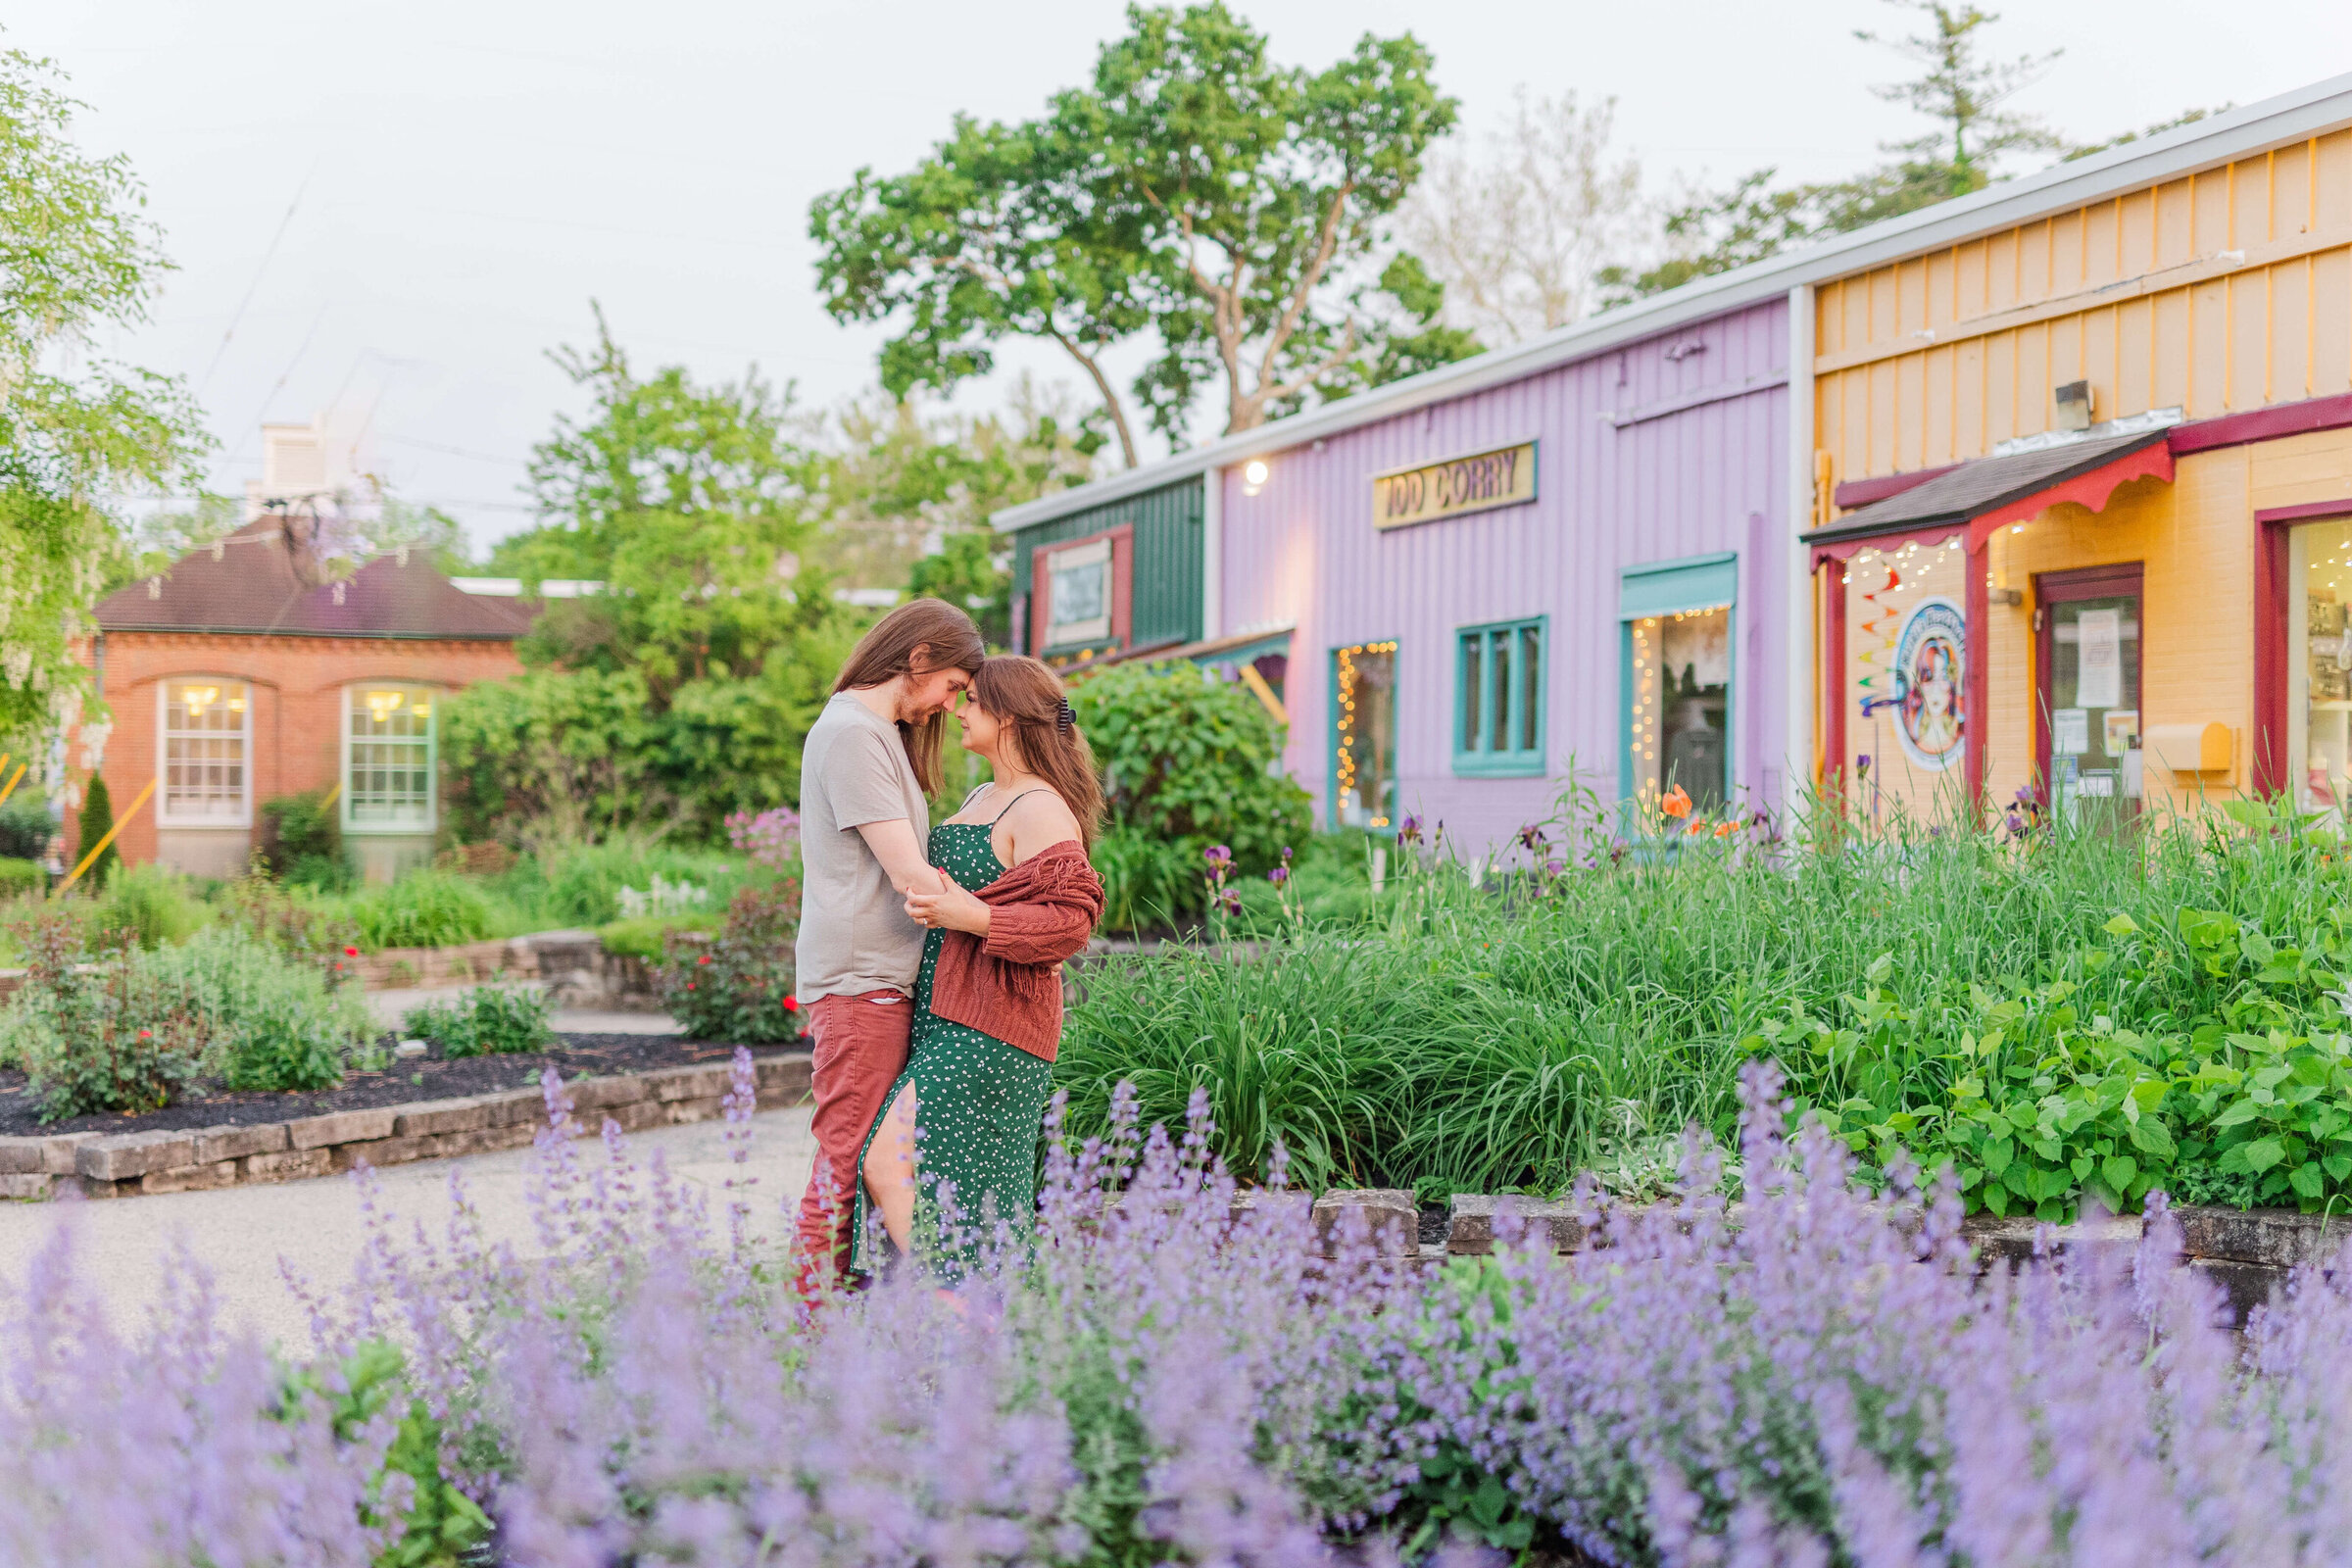 A man and woman hold each other in a garden of purple flowers. There is also a purple building in back of them. They are down in yellow springs ohio